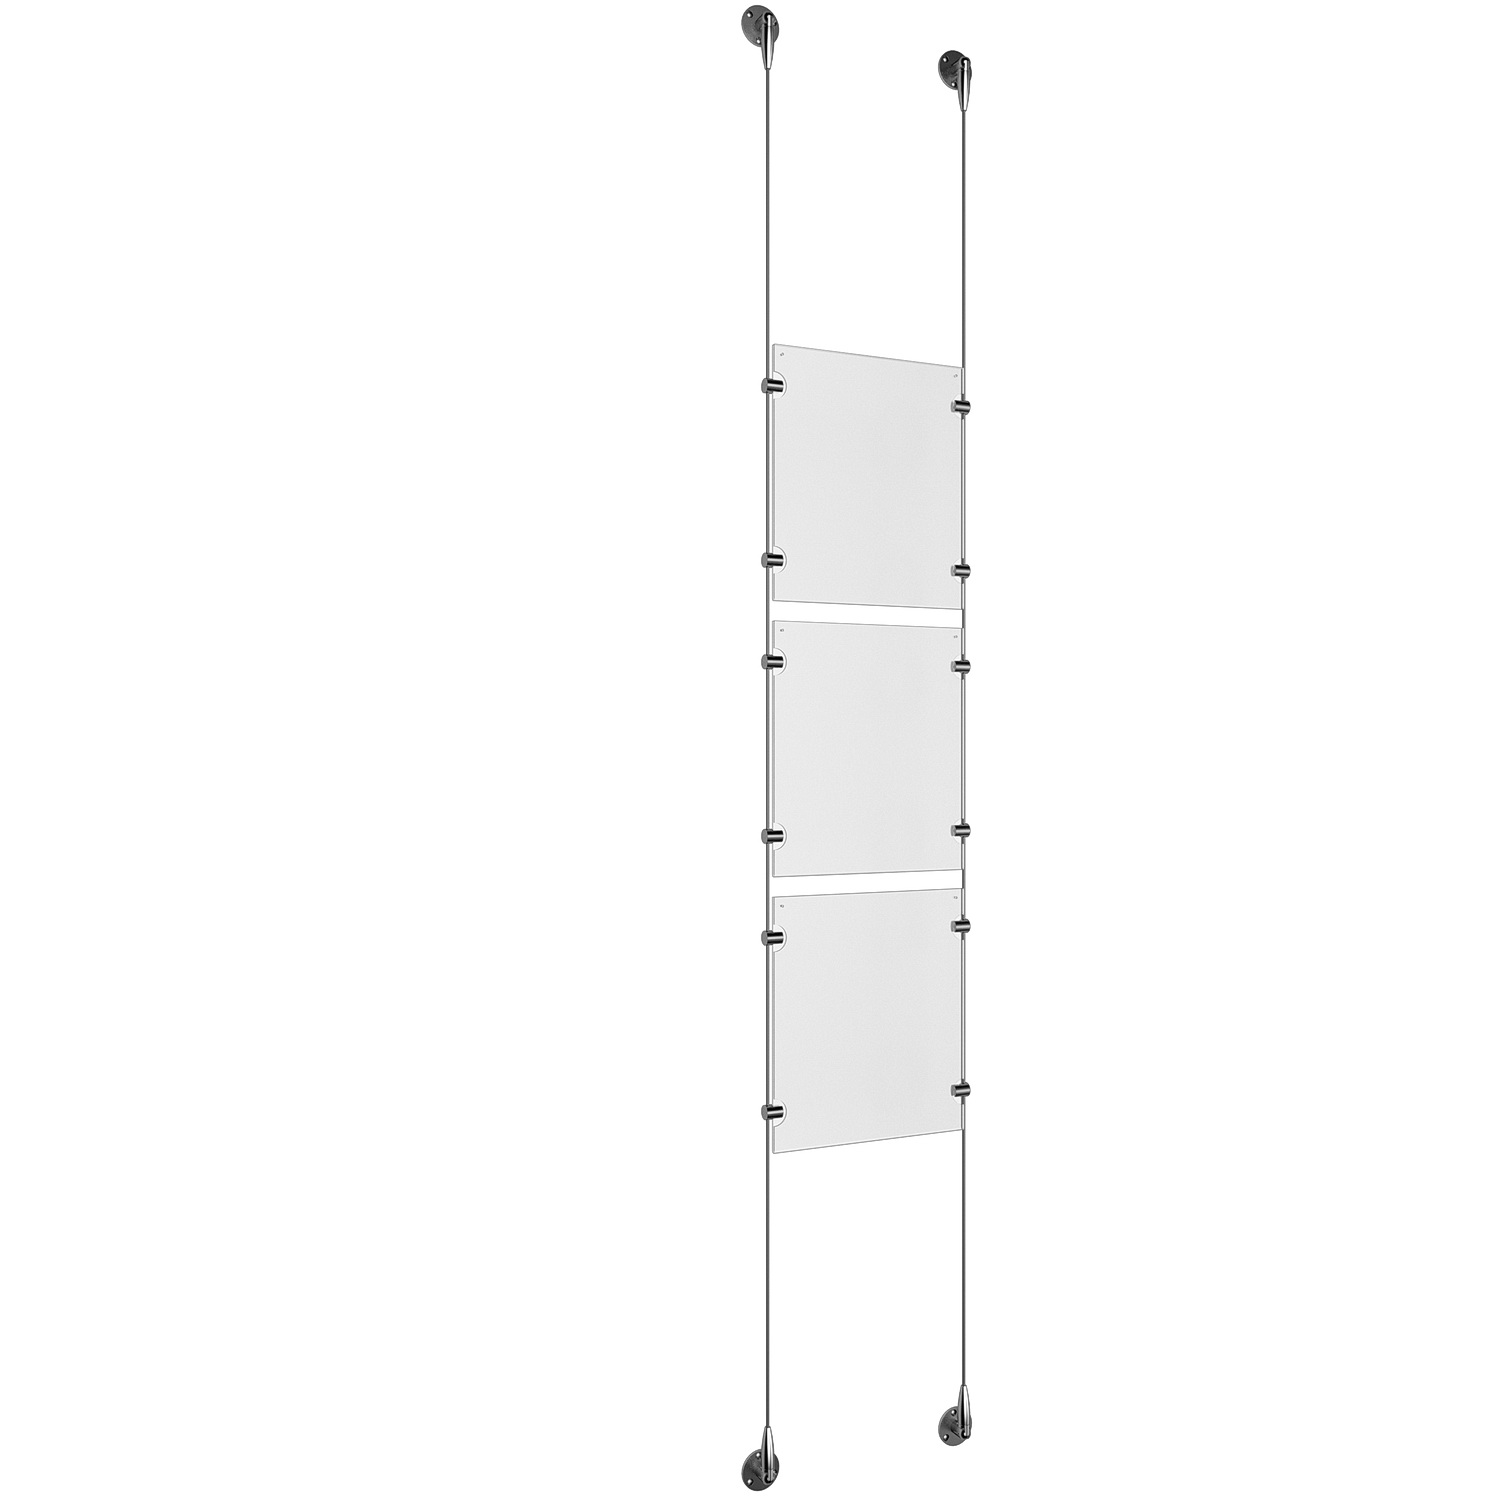 (3) 8-1/2'' Width x 11'' Height Clear Acrylic Frame & (2) Stainless Steel Satin Brushed Adjustable Angle Signature 1/8'' Cable Systems with (12) Single-Sided Panel Grippers